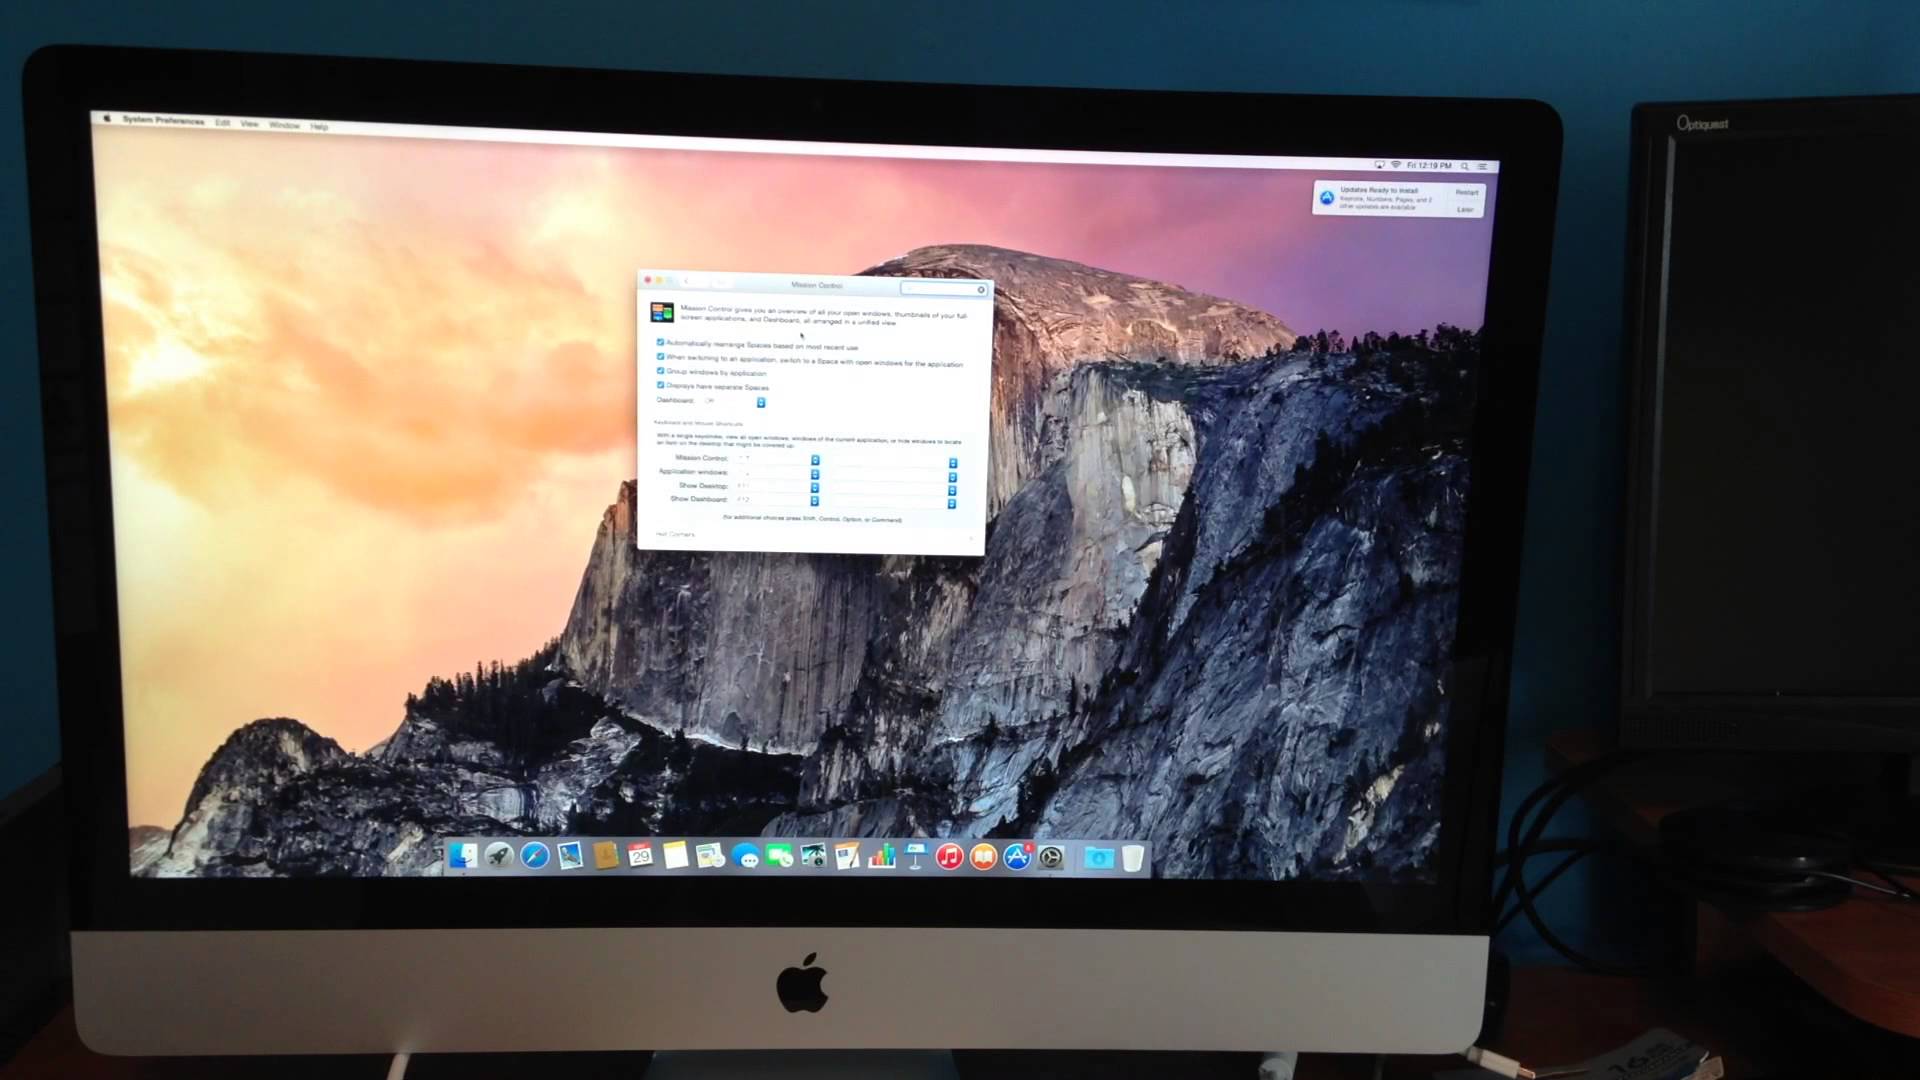 iMac 27 inch First Time Turning On - Guide Manual set up - YouTube